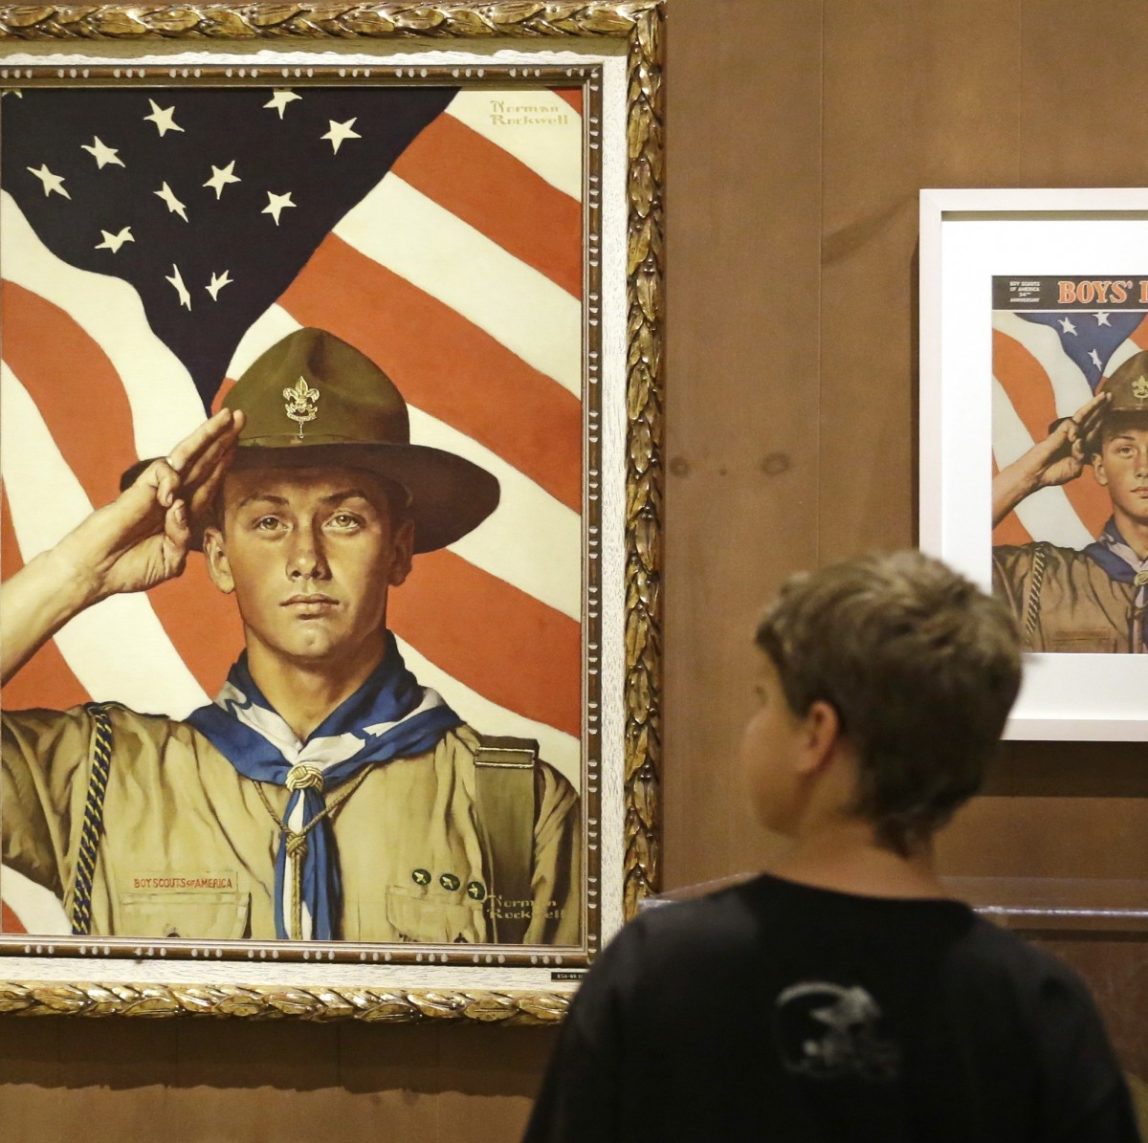 Are The Boy Scouts Perpetuating Bullying?